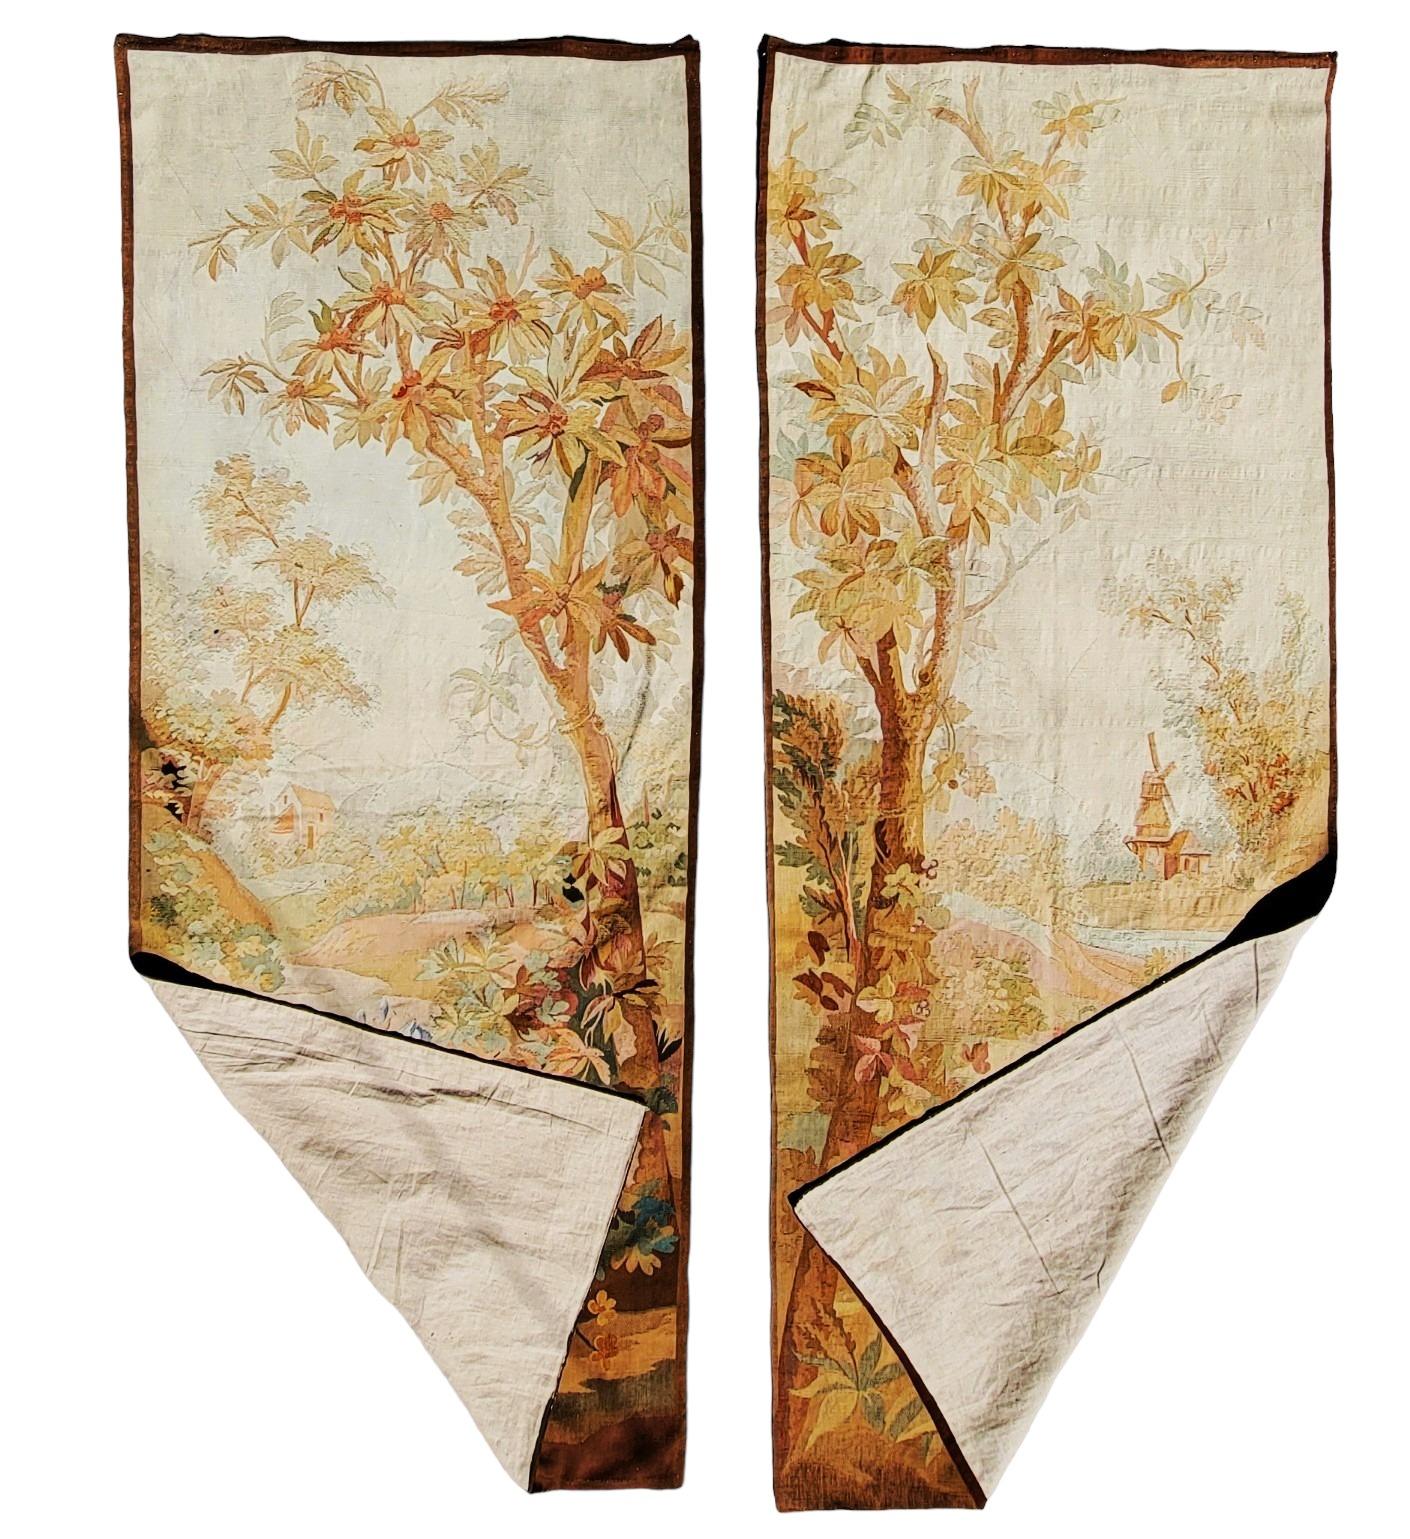 wonderful 19th century Aubusson tapestry from the Estate of Jackie and Jean Autry. These Aubusson Tapestry or Curtains are in amazing shape. Wonderful wool and cotton over raw linen backing. Provide a natural outdoor home scene.

This pair of